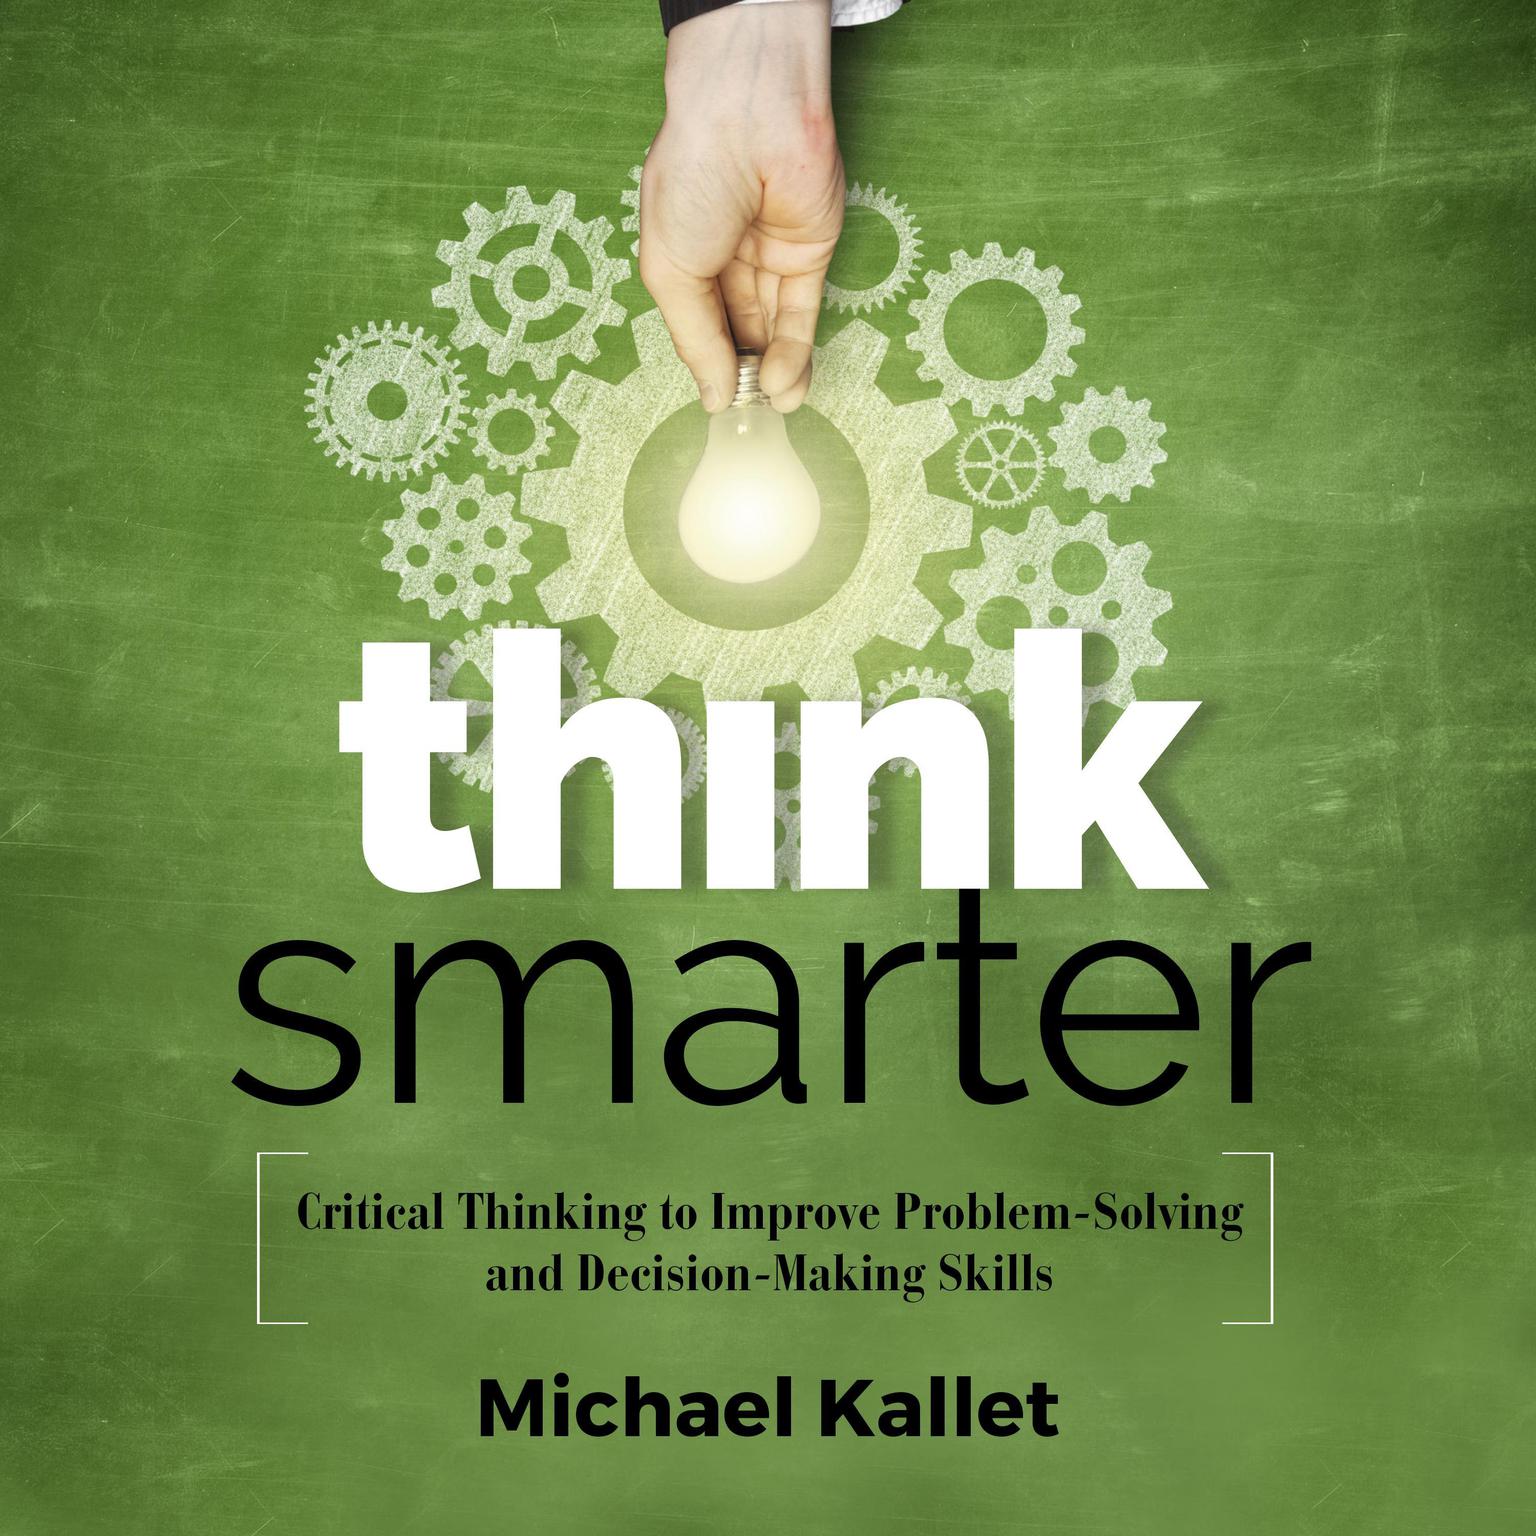 Think Smarter: Critical Thinking to Improve Problem-Solving and Decision-Making Skills Audiobook, by Michael Kallet